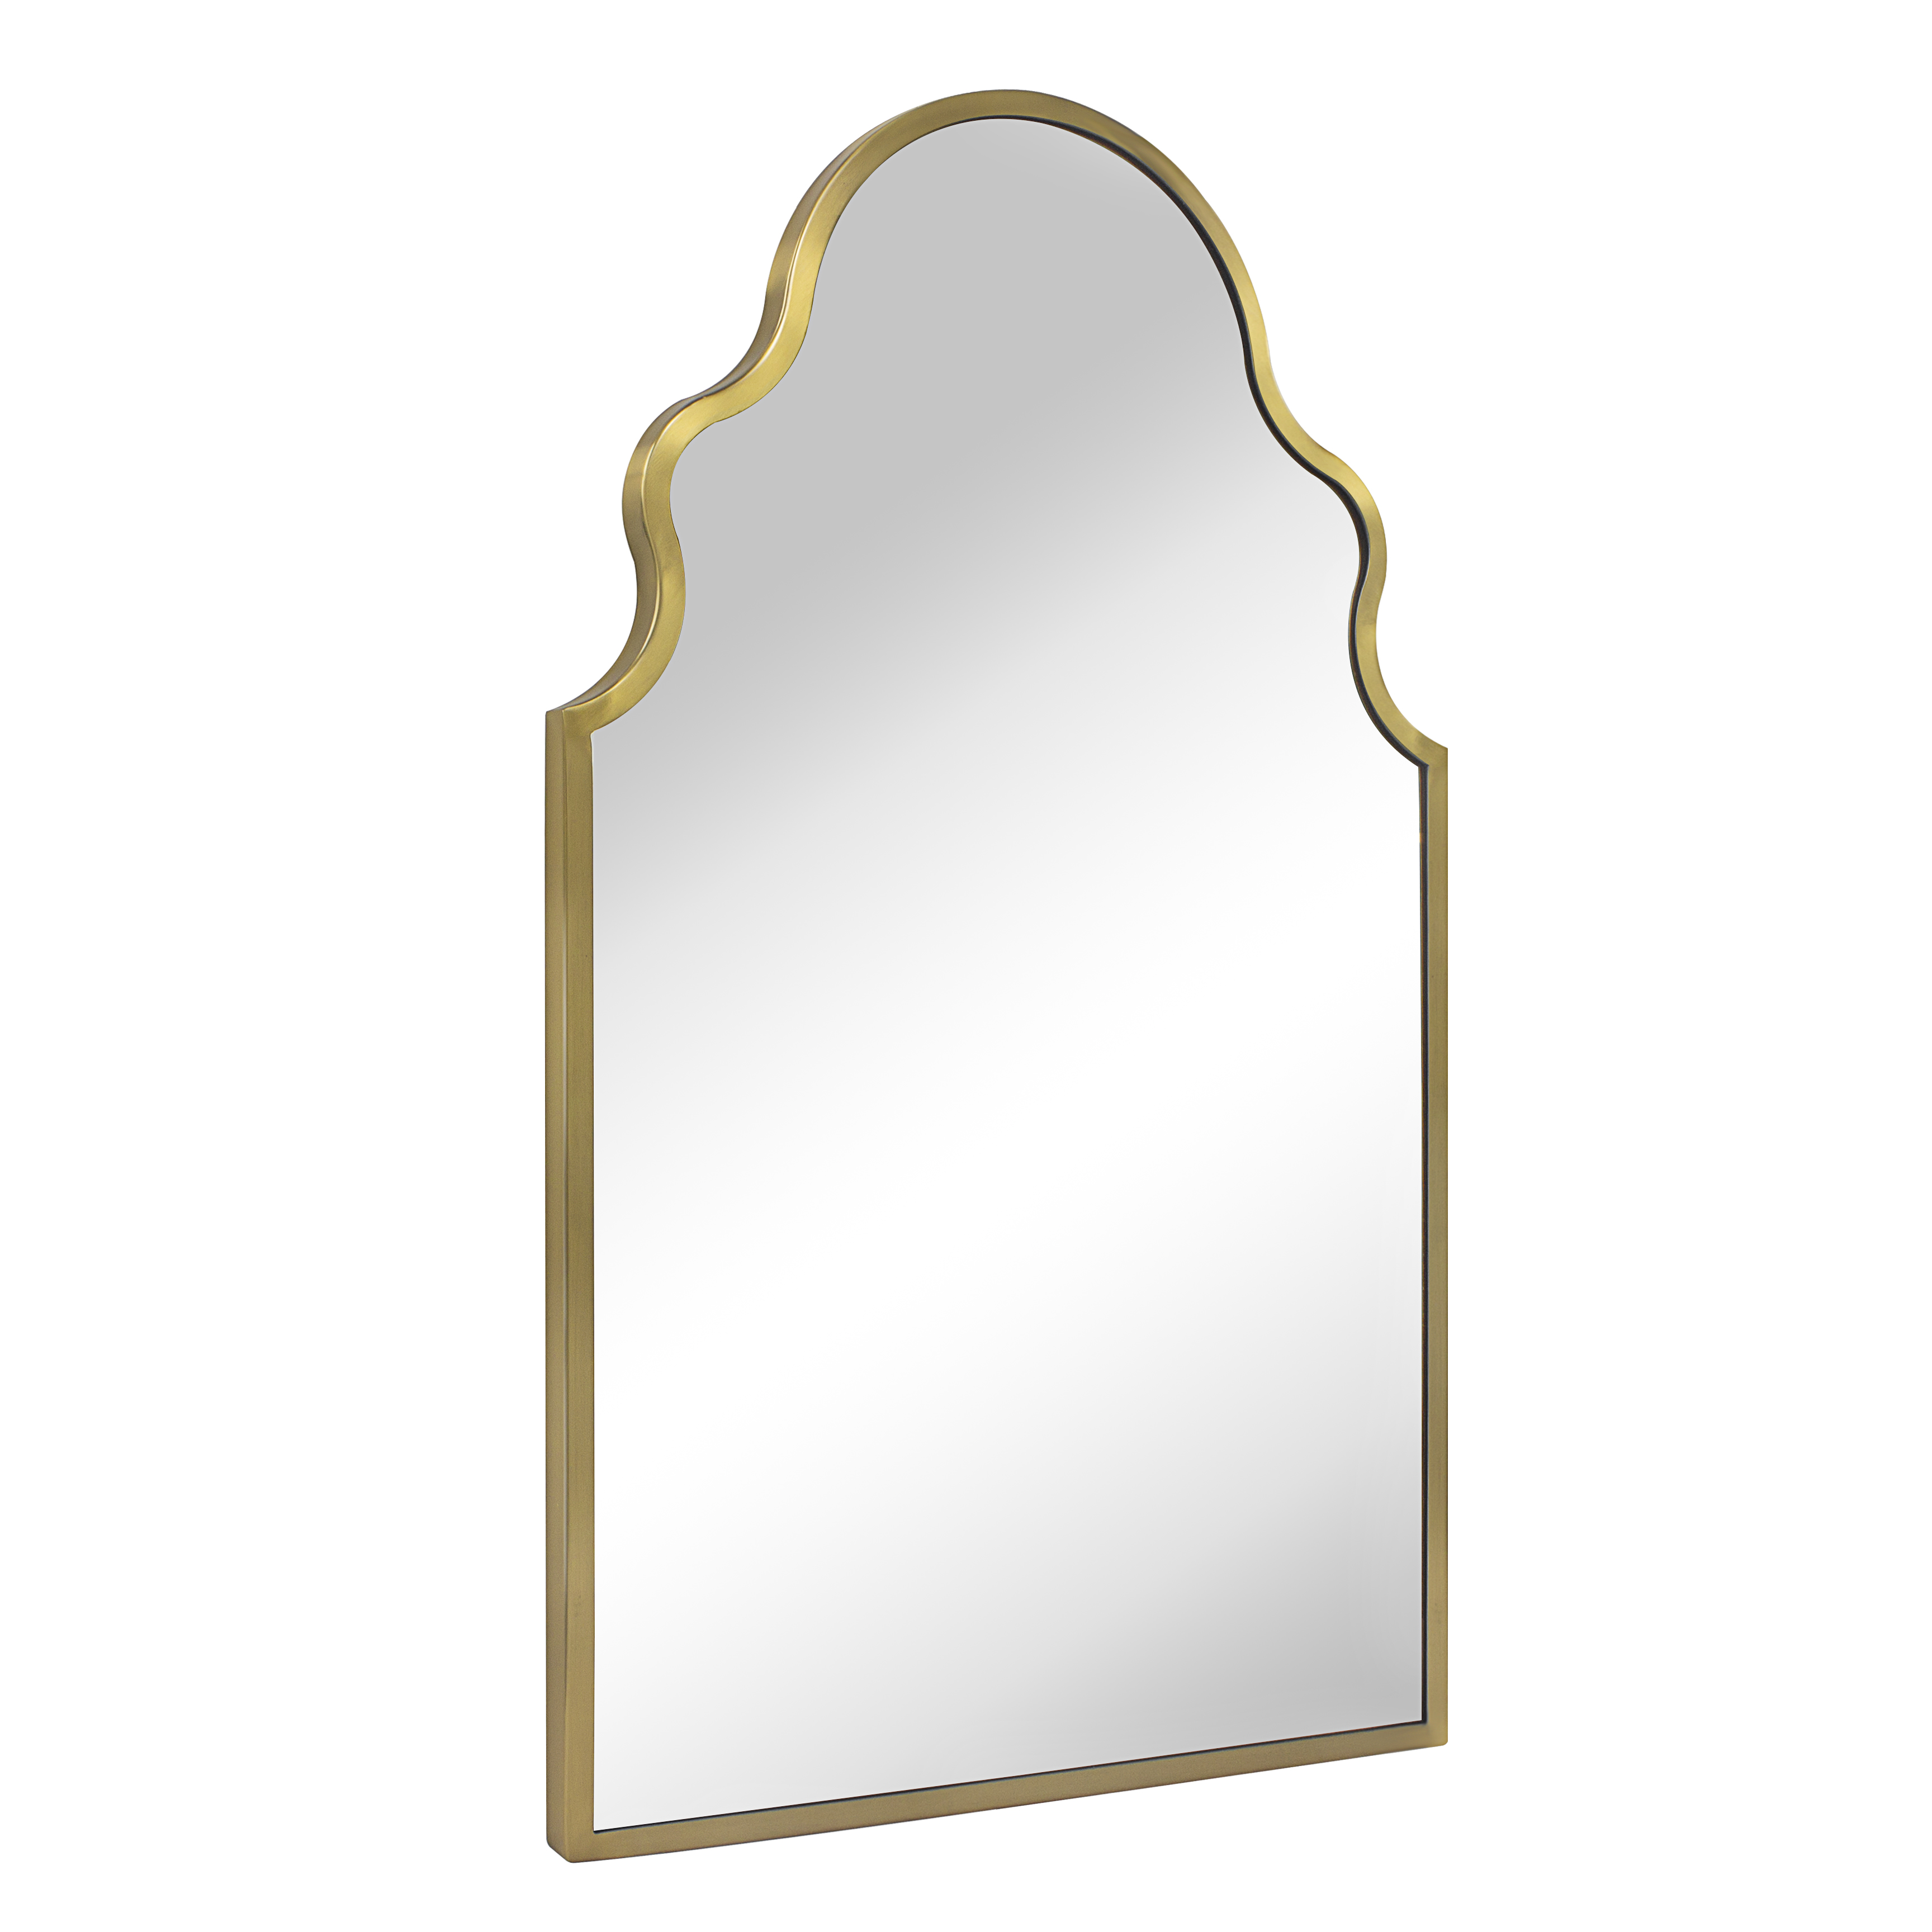 Auriella Arch Metal Wall Mirror-Brushed Gold